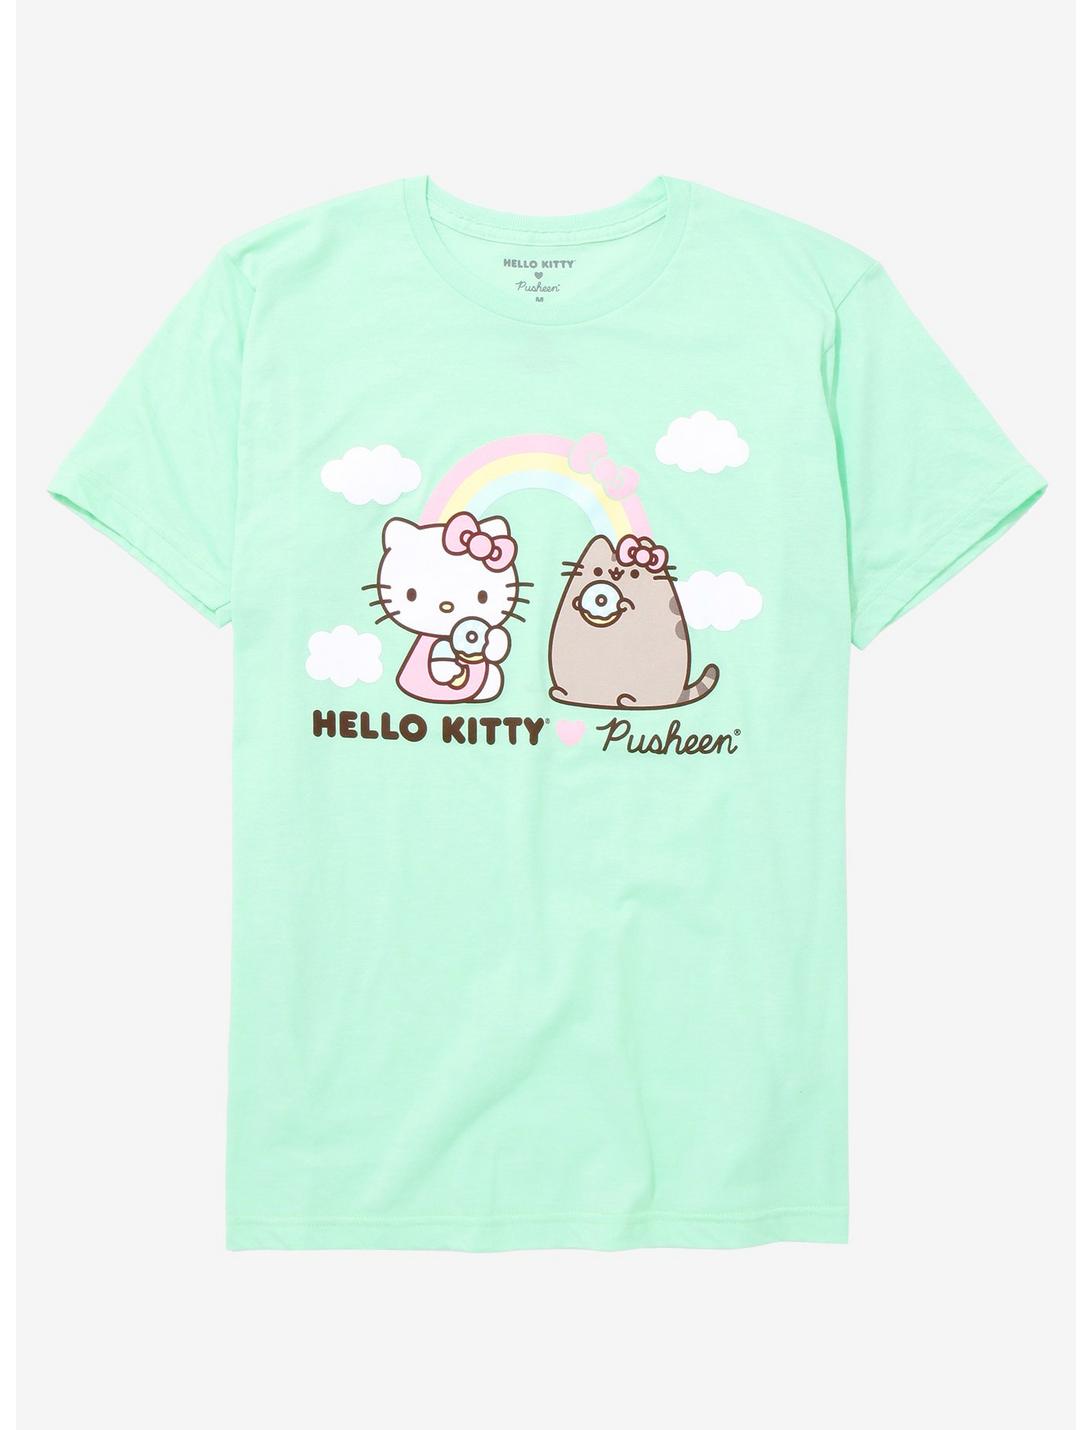 Hello Kitty x Pusheen Snacktime Donuts T-Shirt, MINT, hi-res